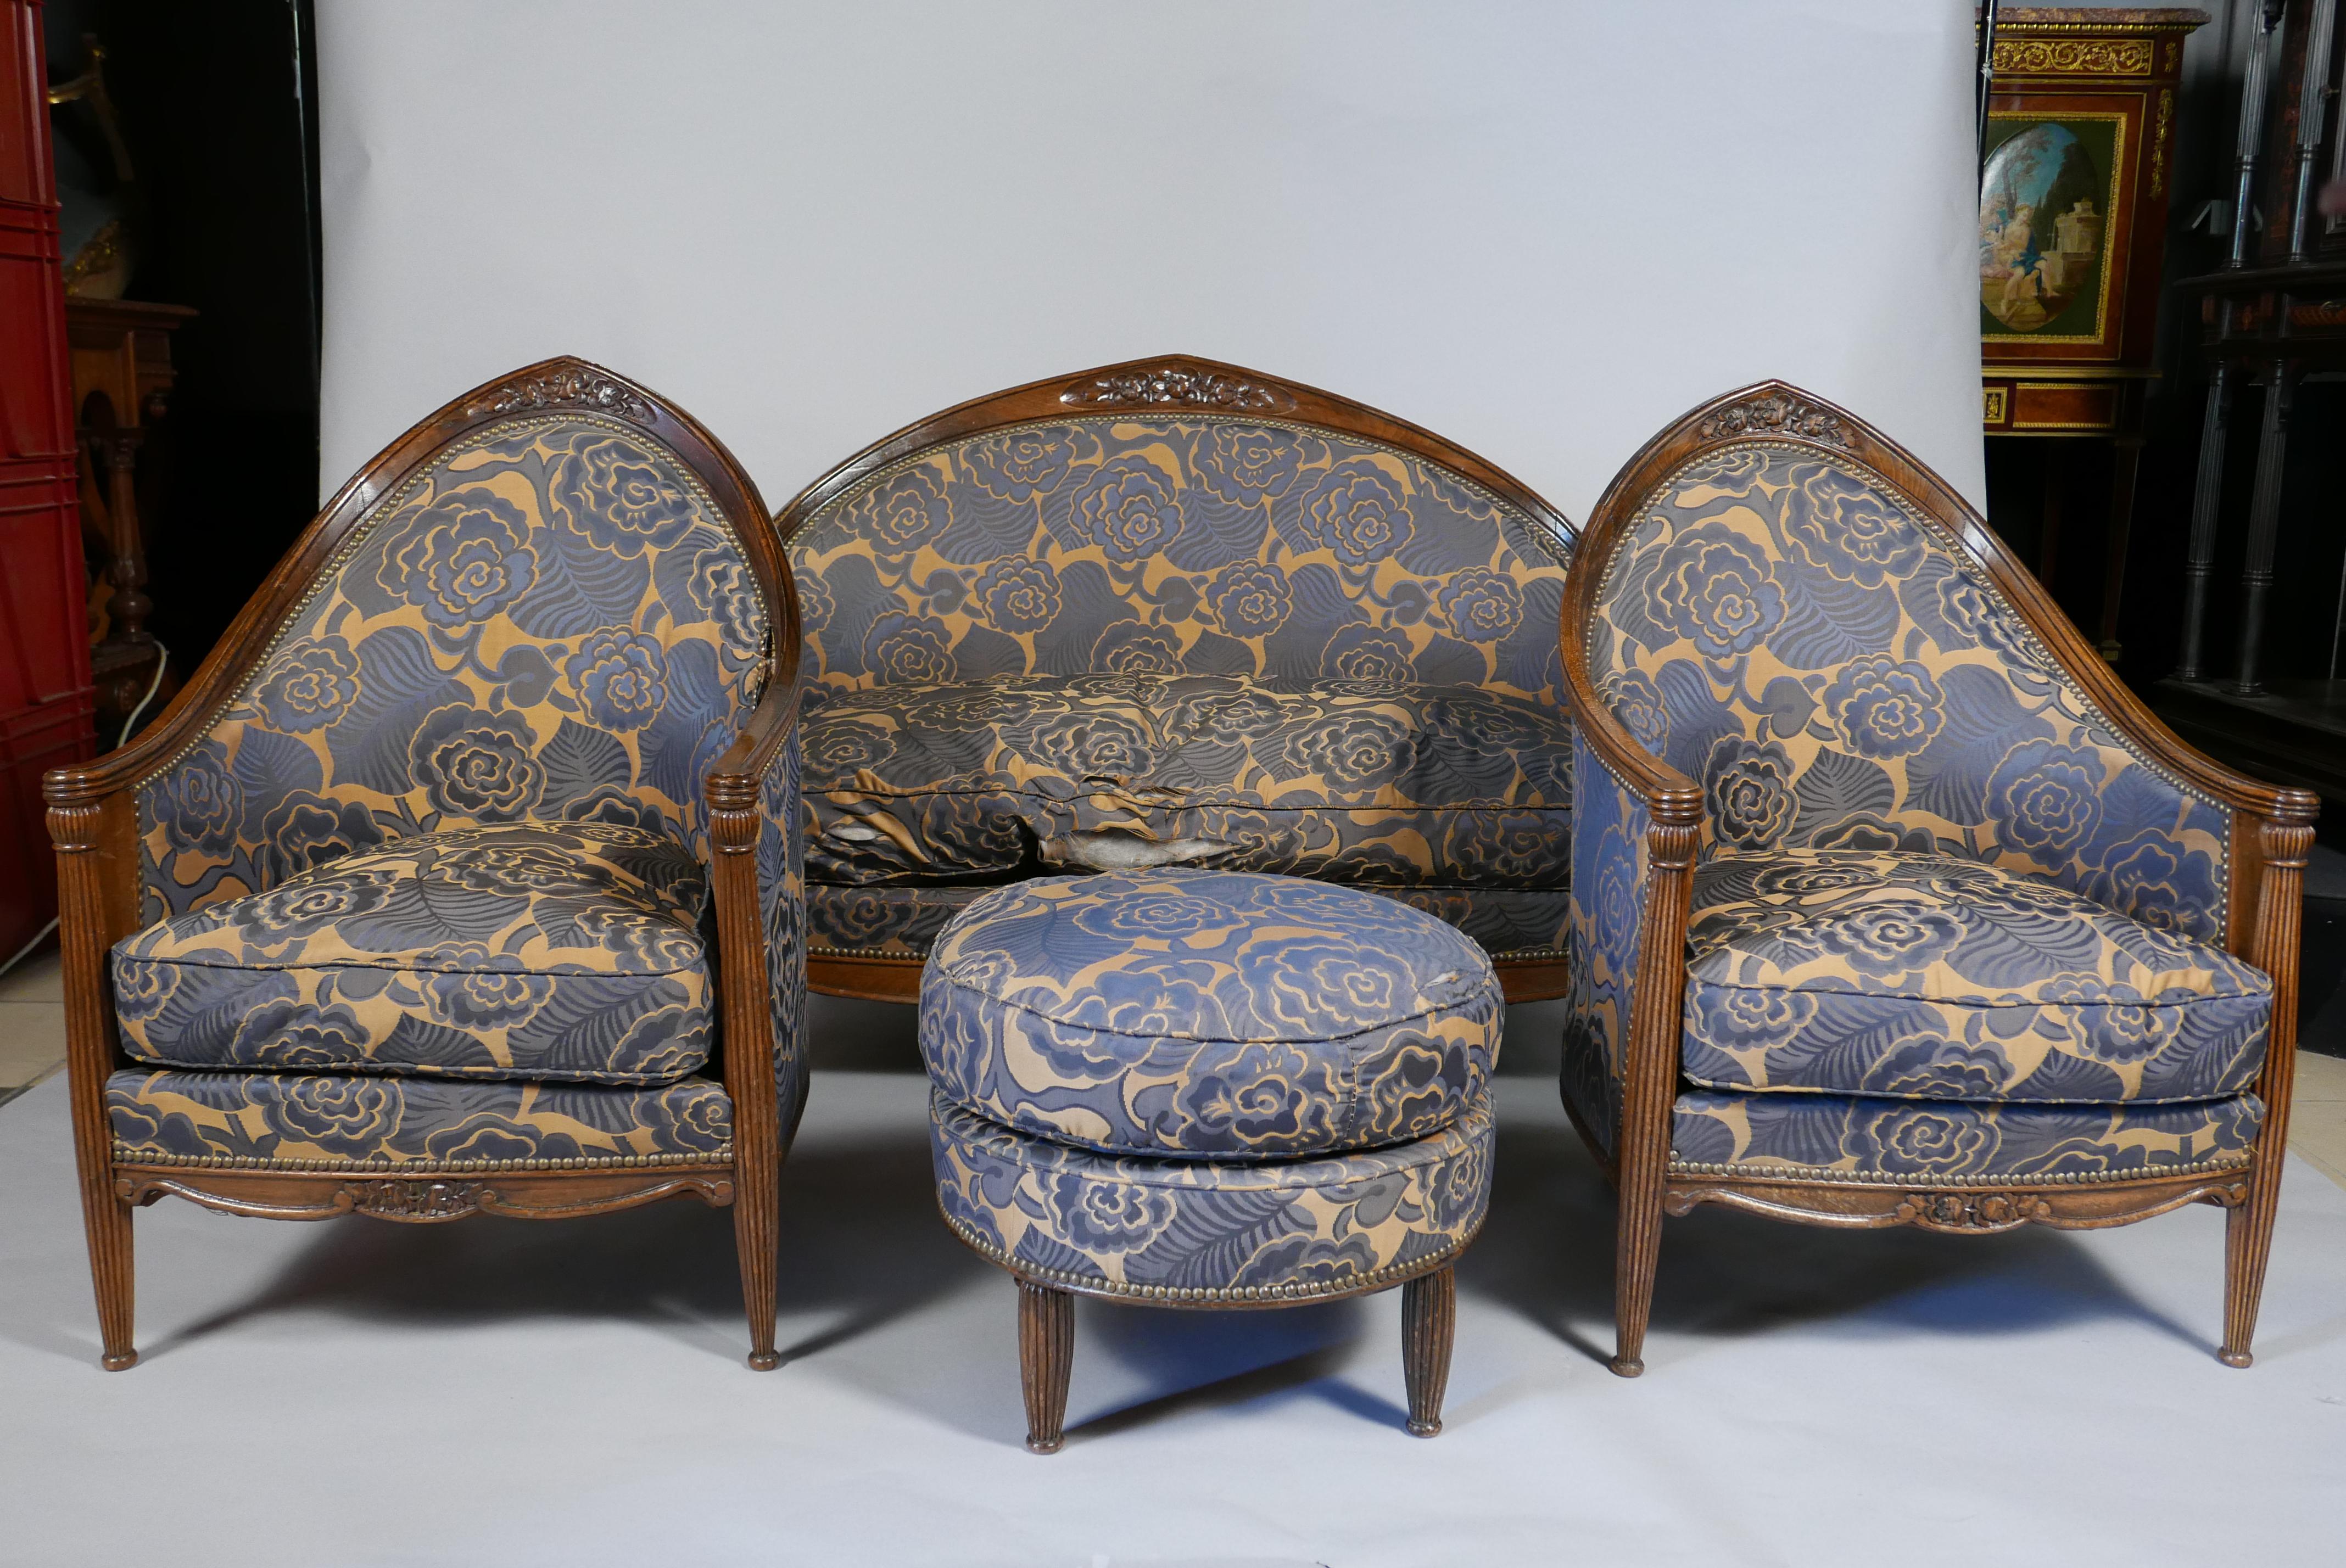 Charming Art Deco salon set including a marquise, a pair of armchairs, a pair of chairs and a stool. They are composed of a gondola-shaped backrest carved with flowers extending to form the armrests with windings for the armchairs and the marquise,